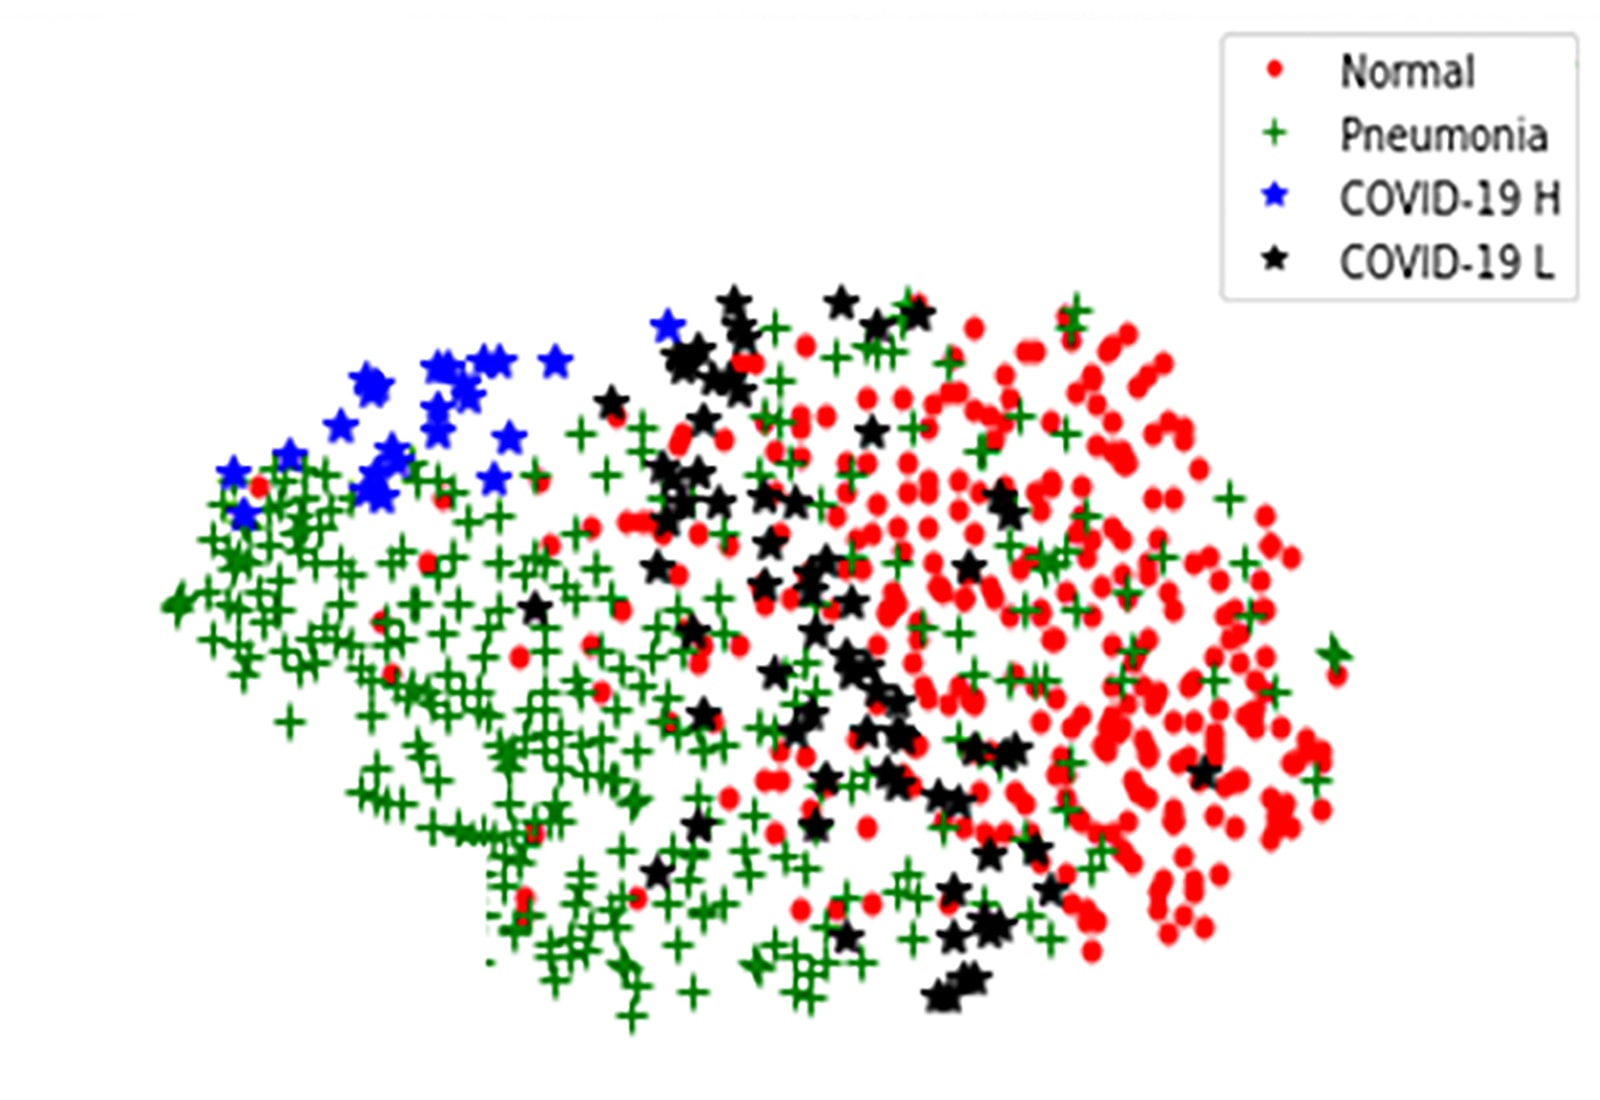 Scatter plot showing clusters of patient types